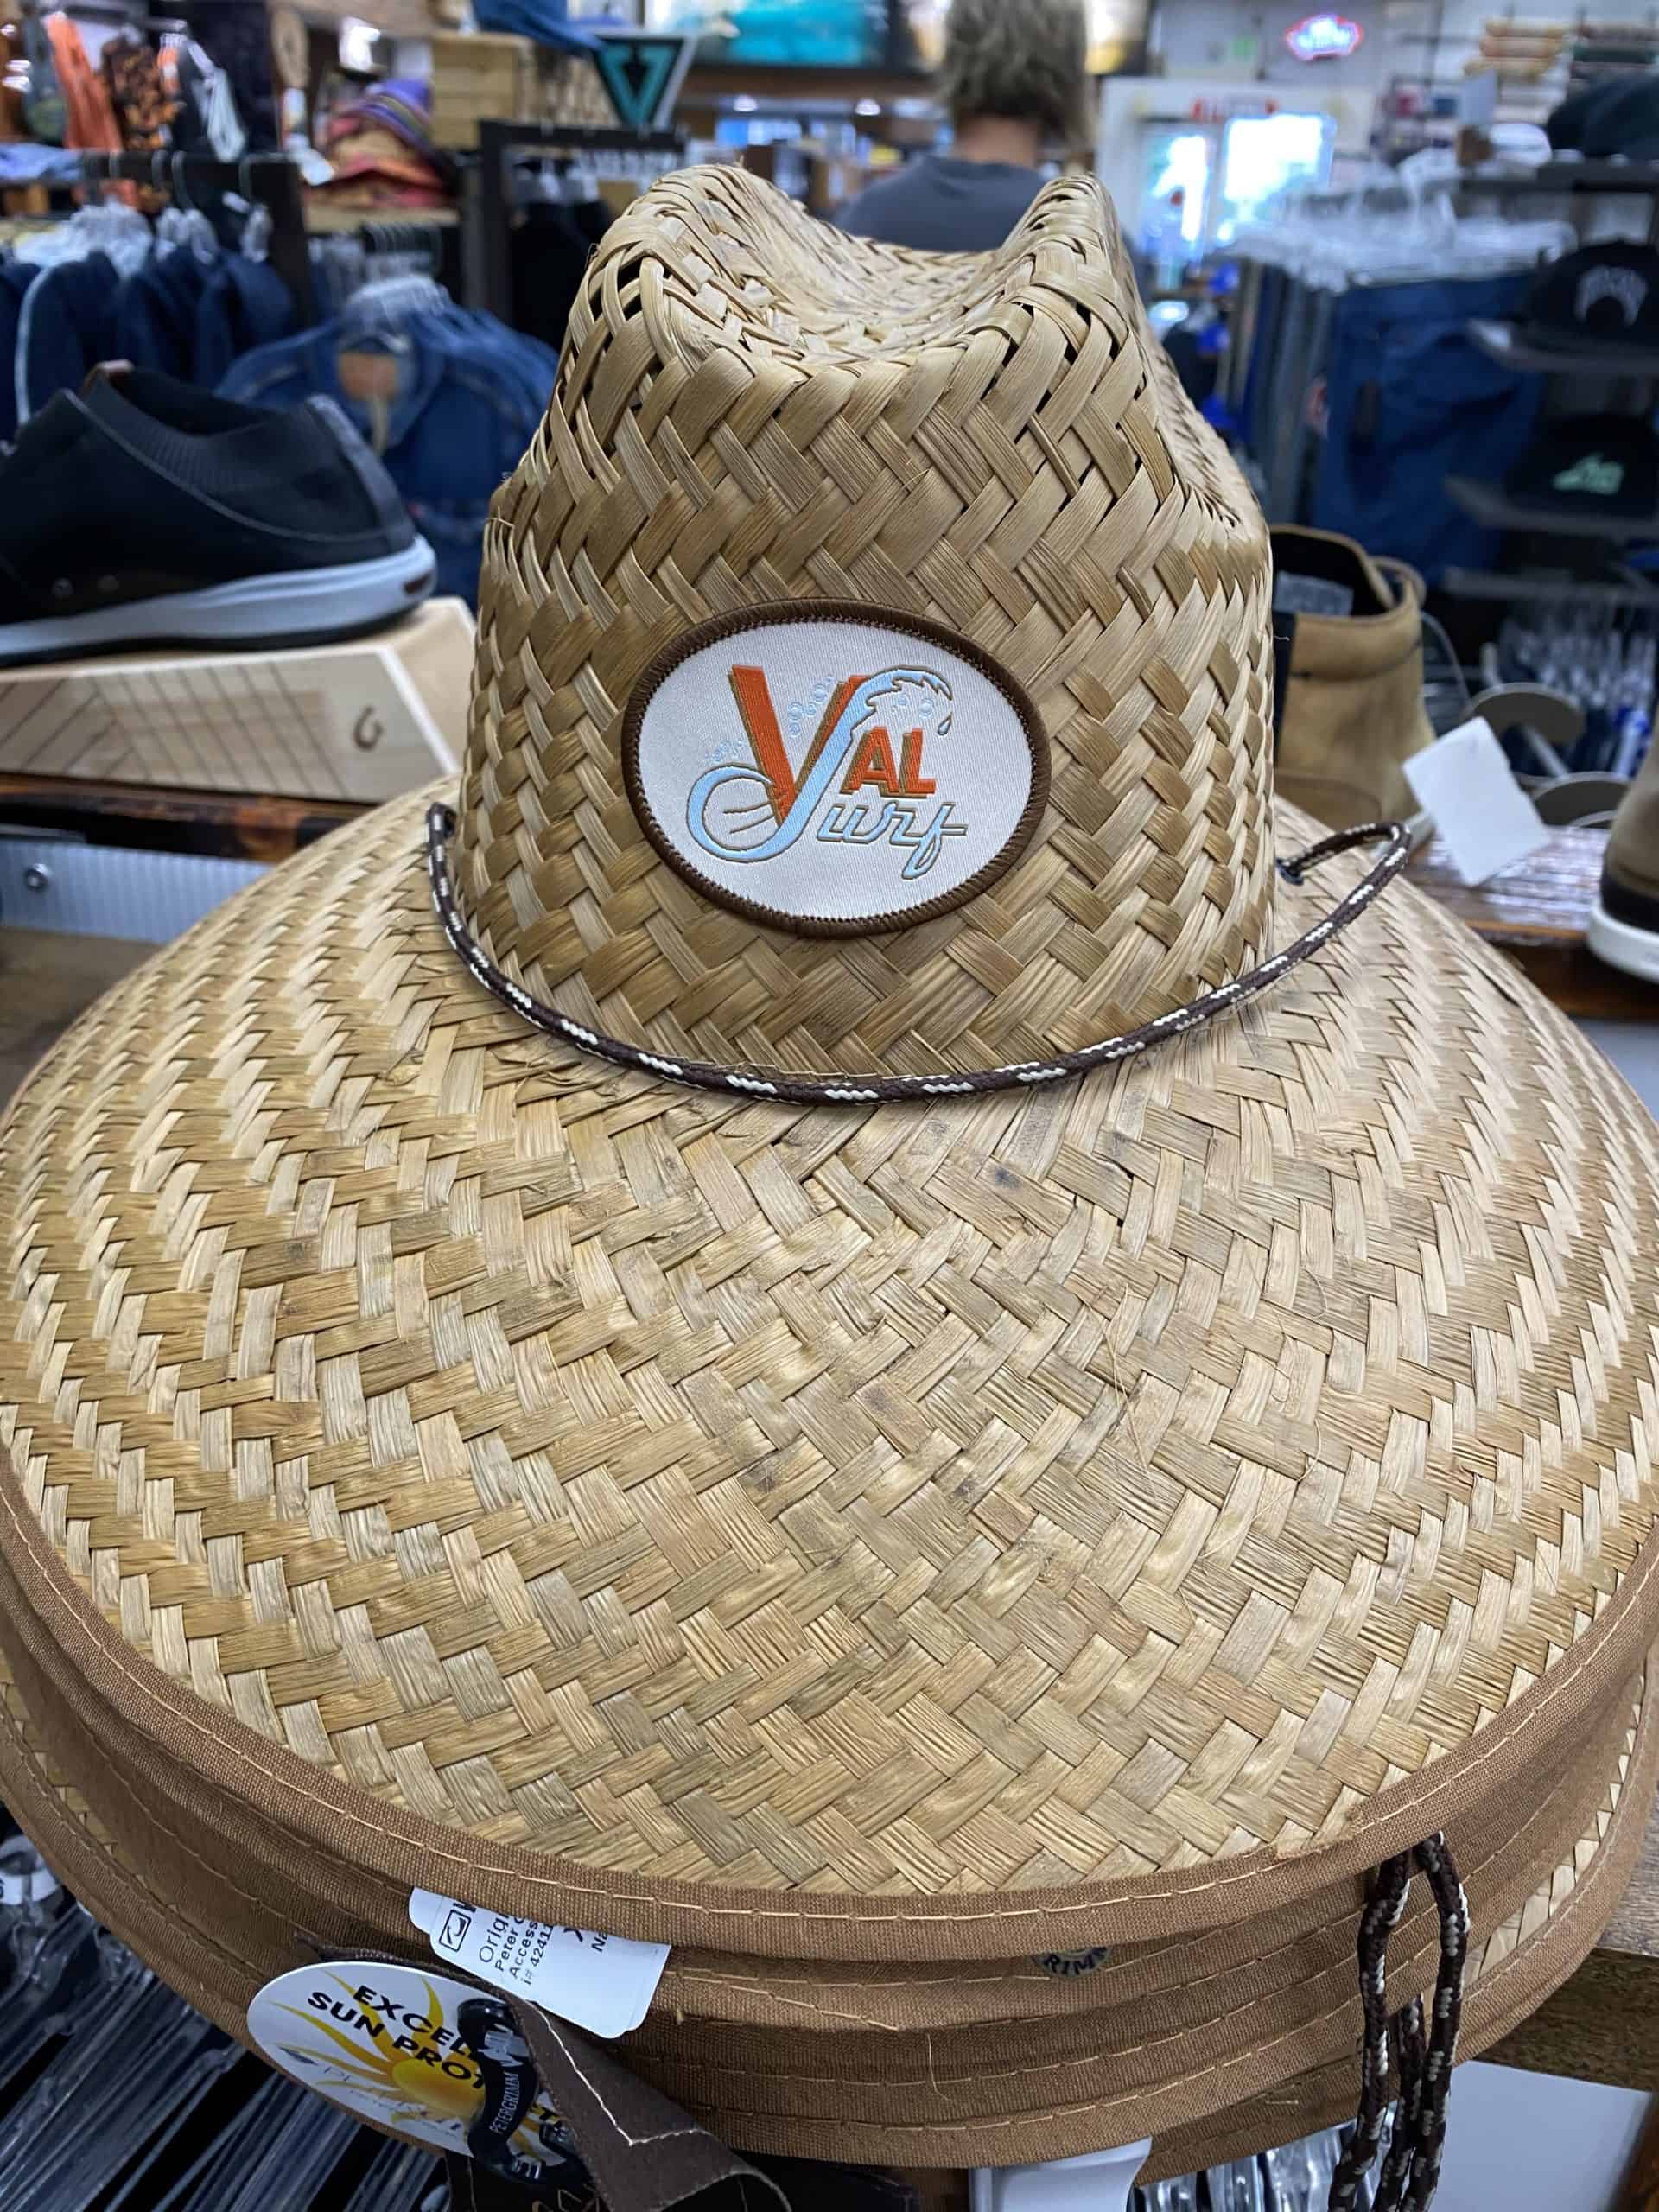 patch affixed to straw hats